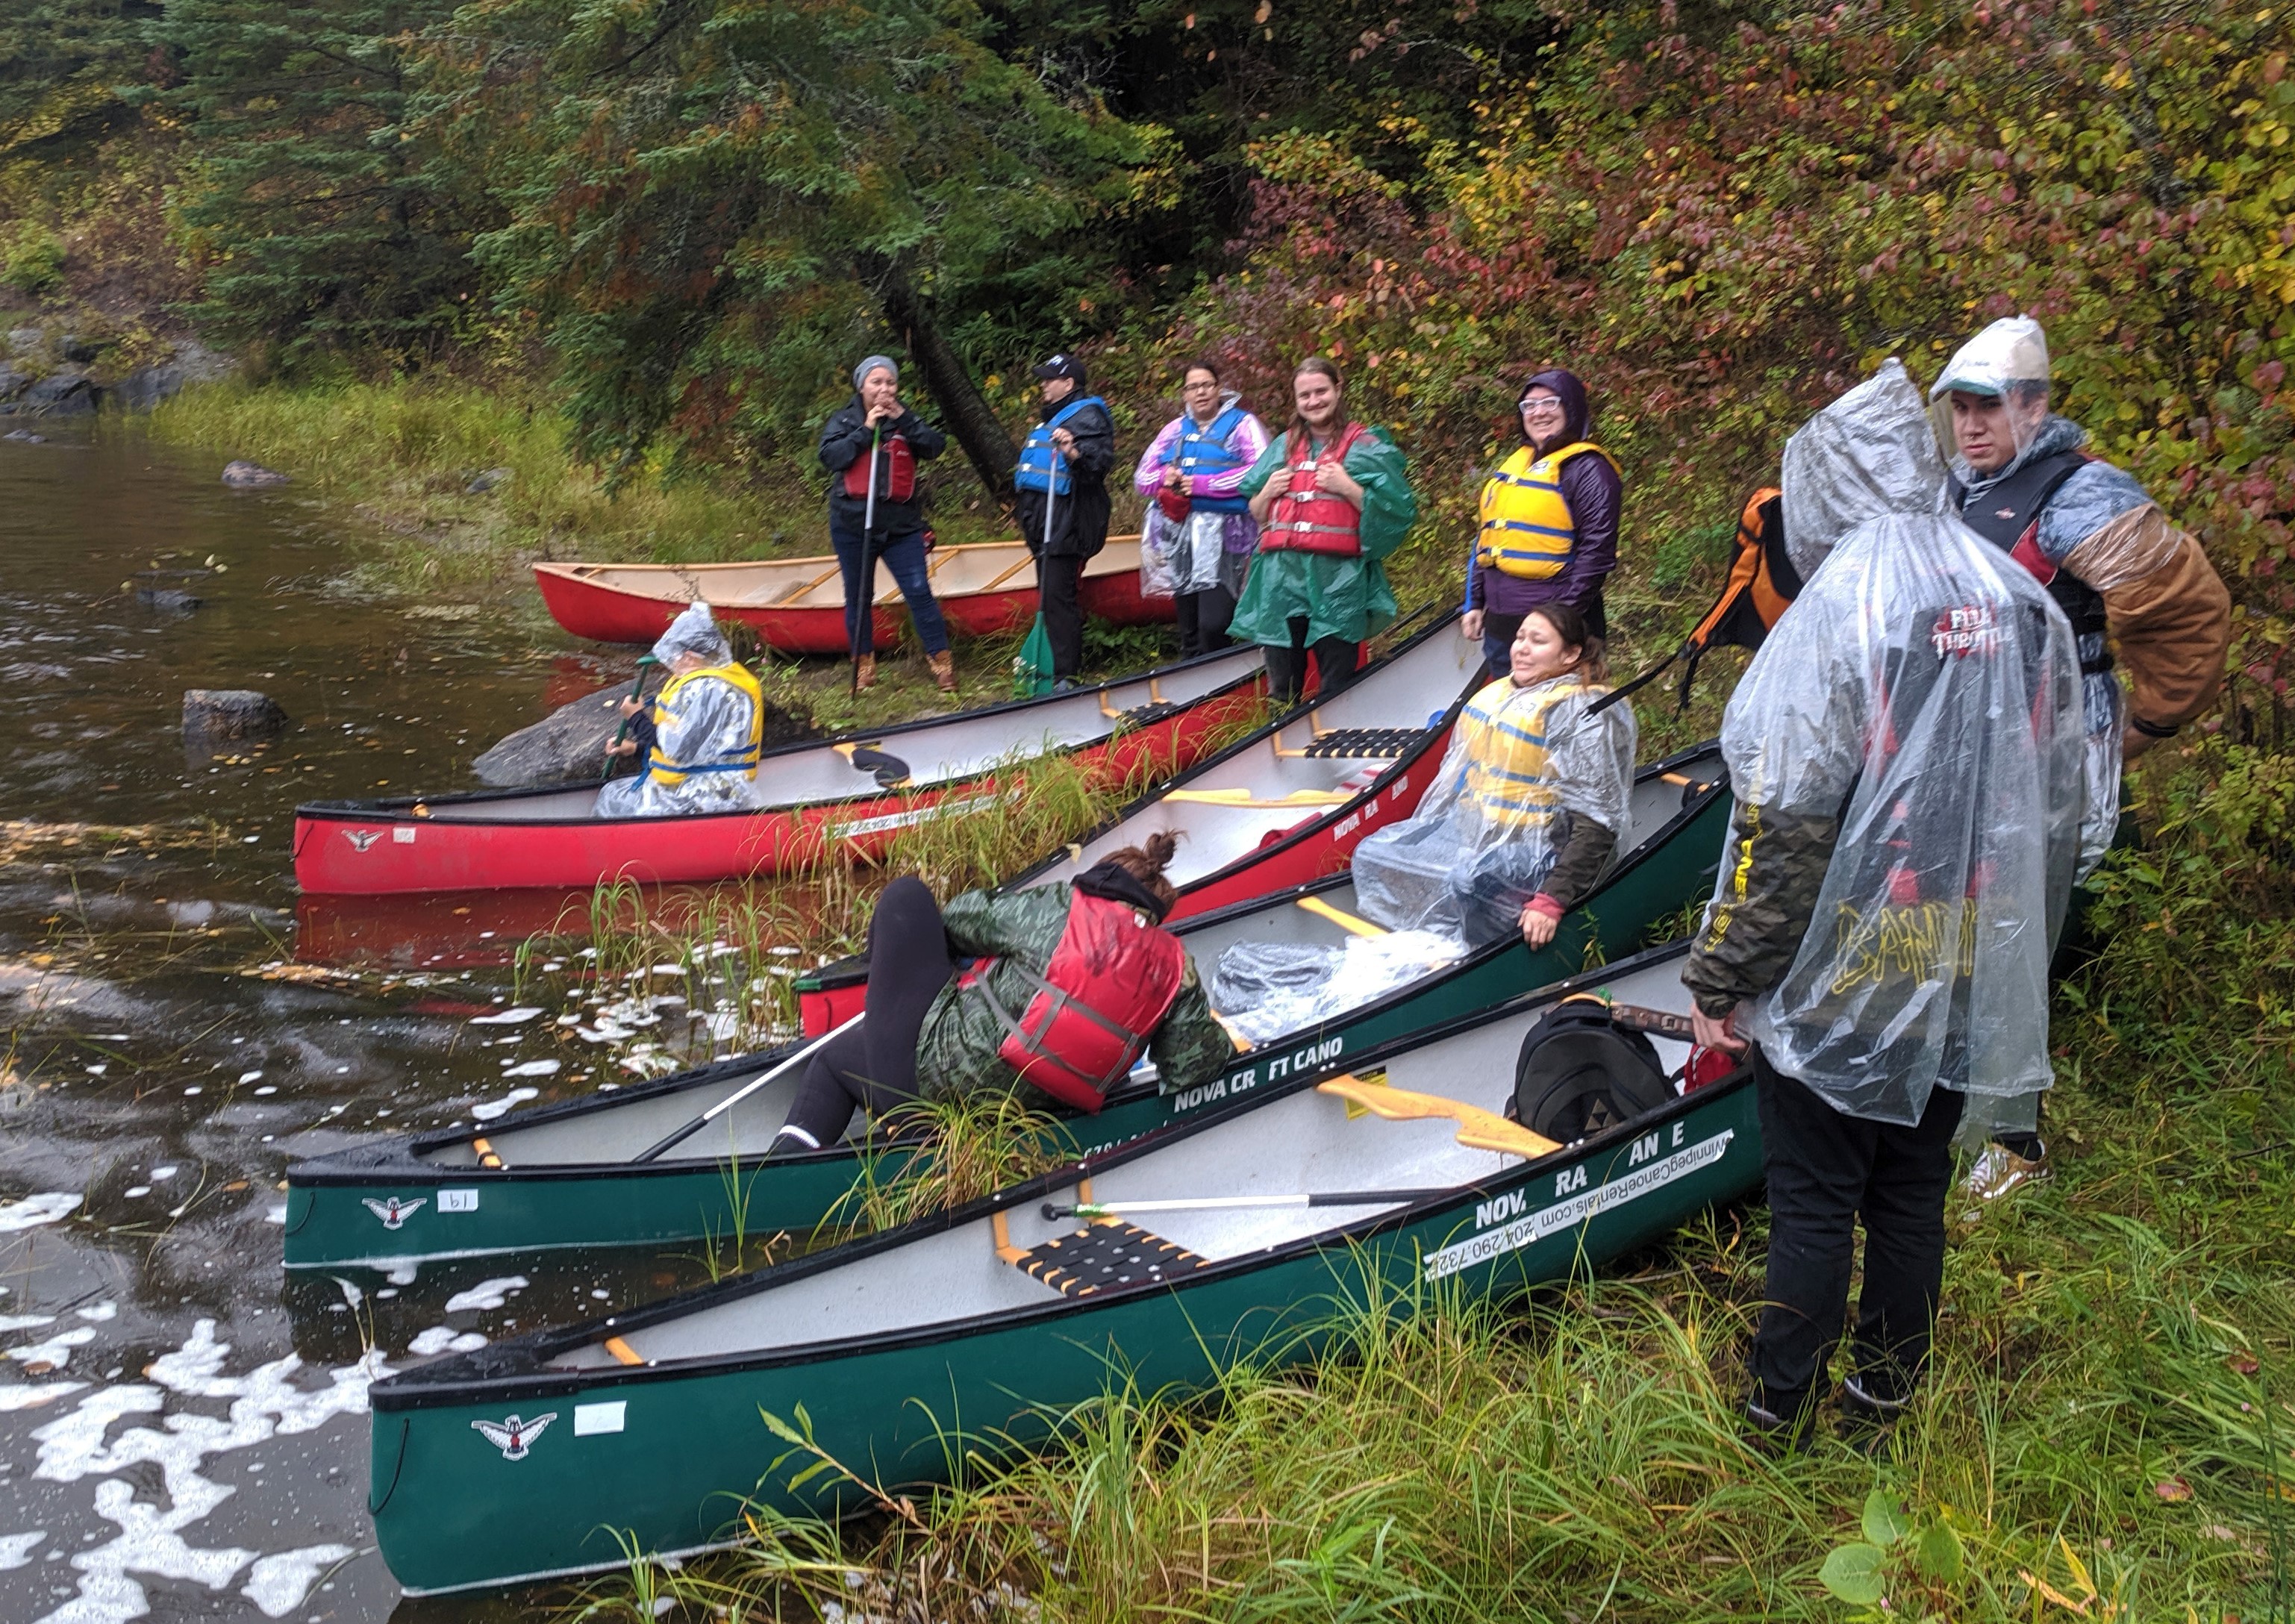 People in colorful rain jackets launch canoes on a lush green bank.